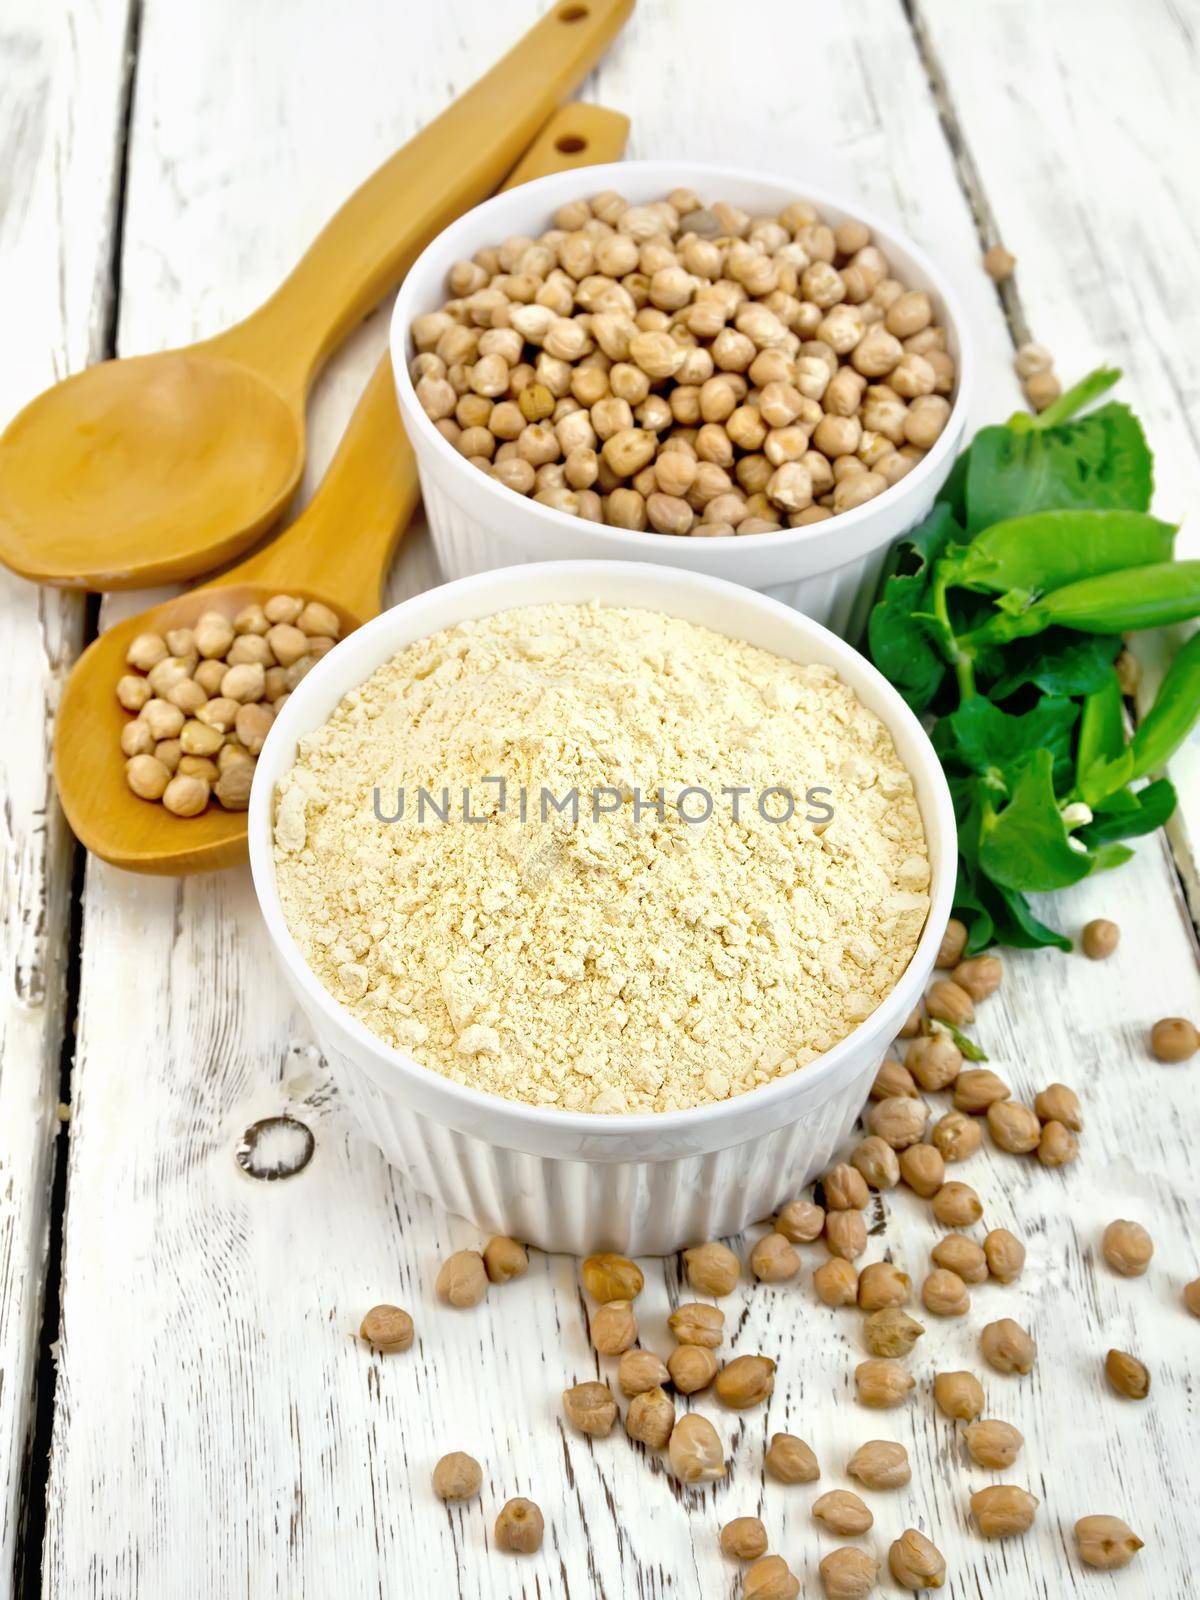 Flour chickpeas in white bowl with peas on board by rezkrr